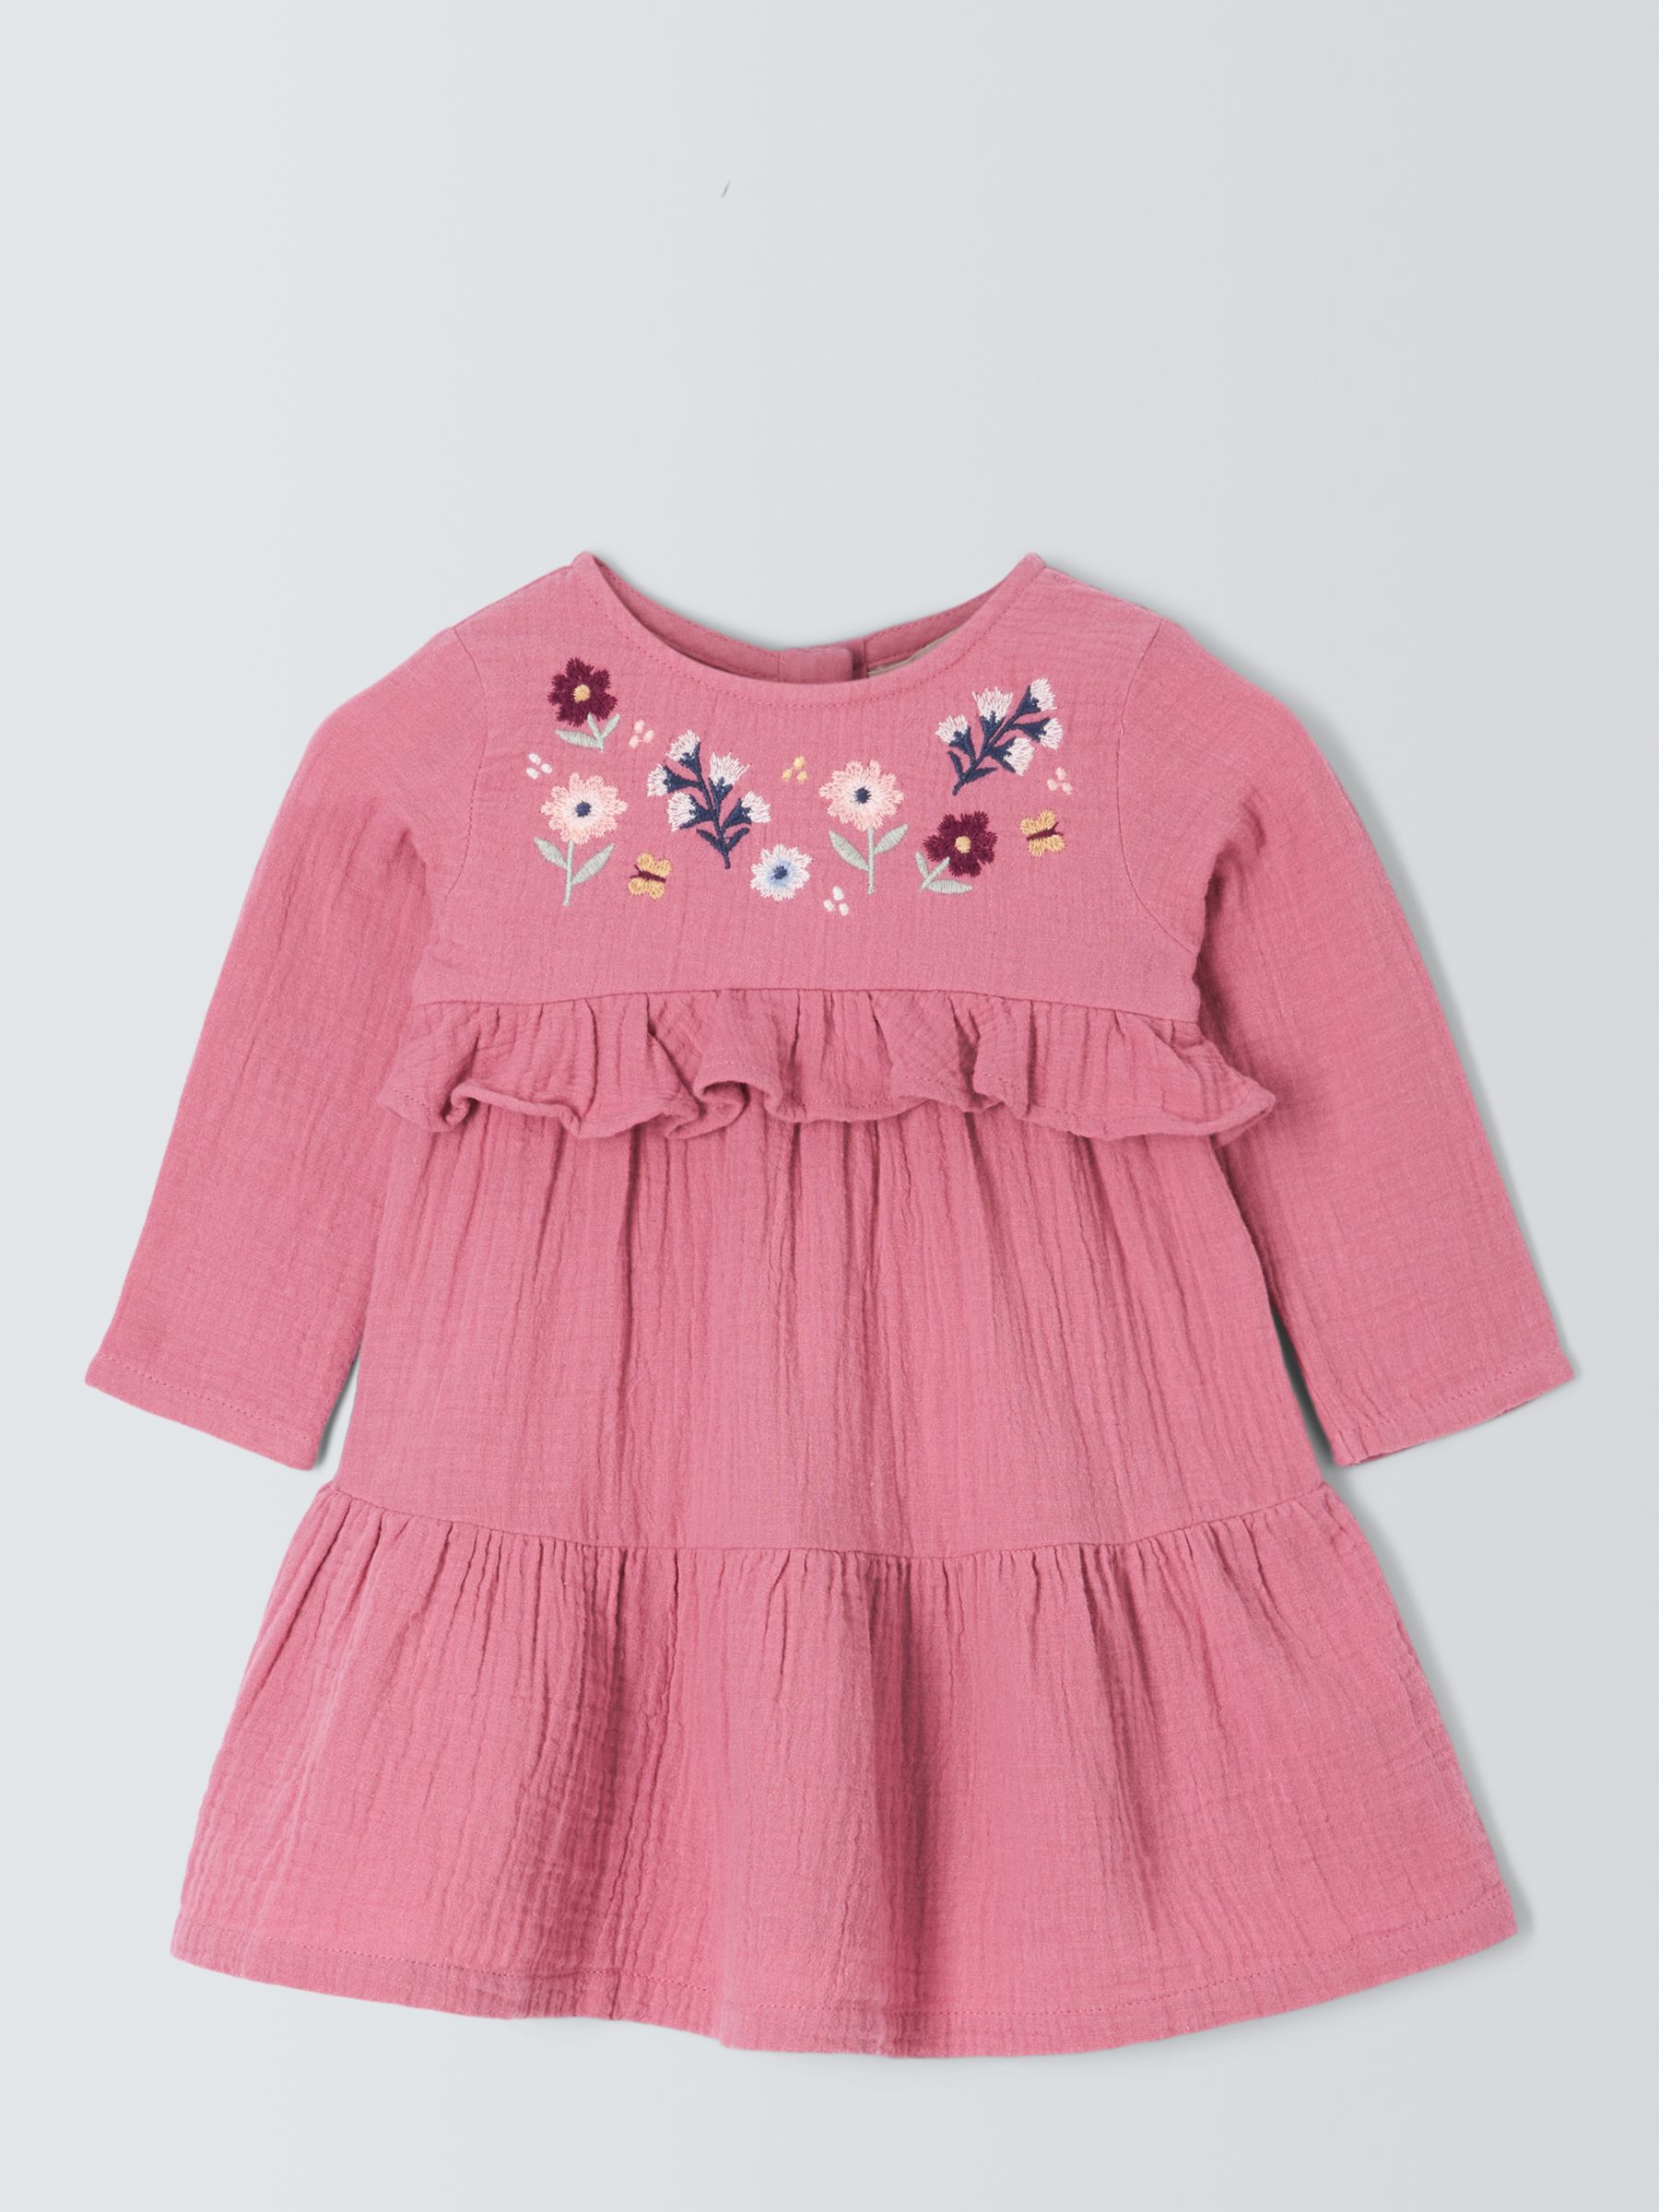 John Lewis Baby Floral Embroidered Long Sleeve Dress, Pink, 2-3 years